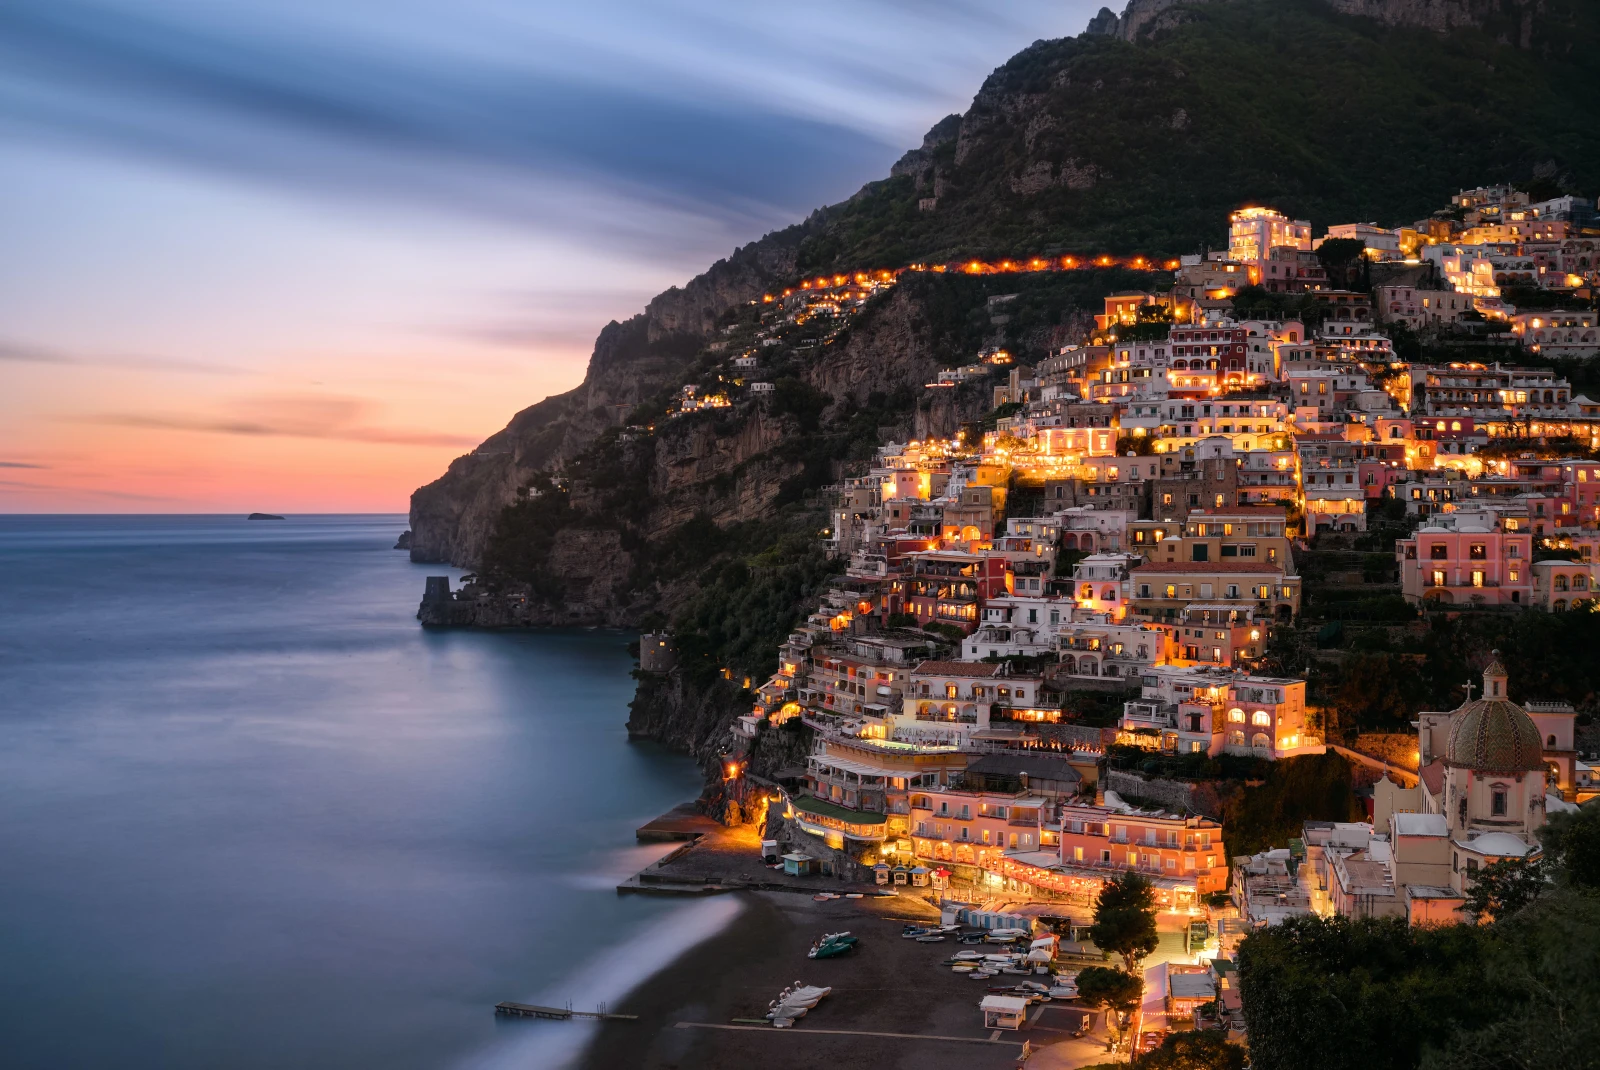 houses on the side of a cliff during nighttime